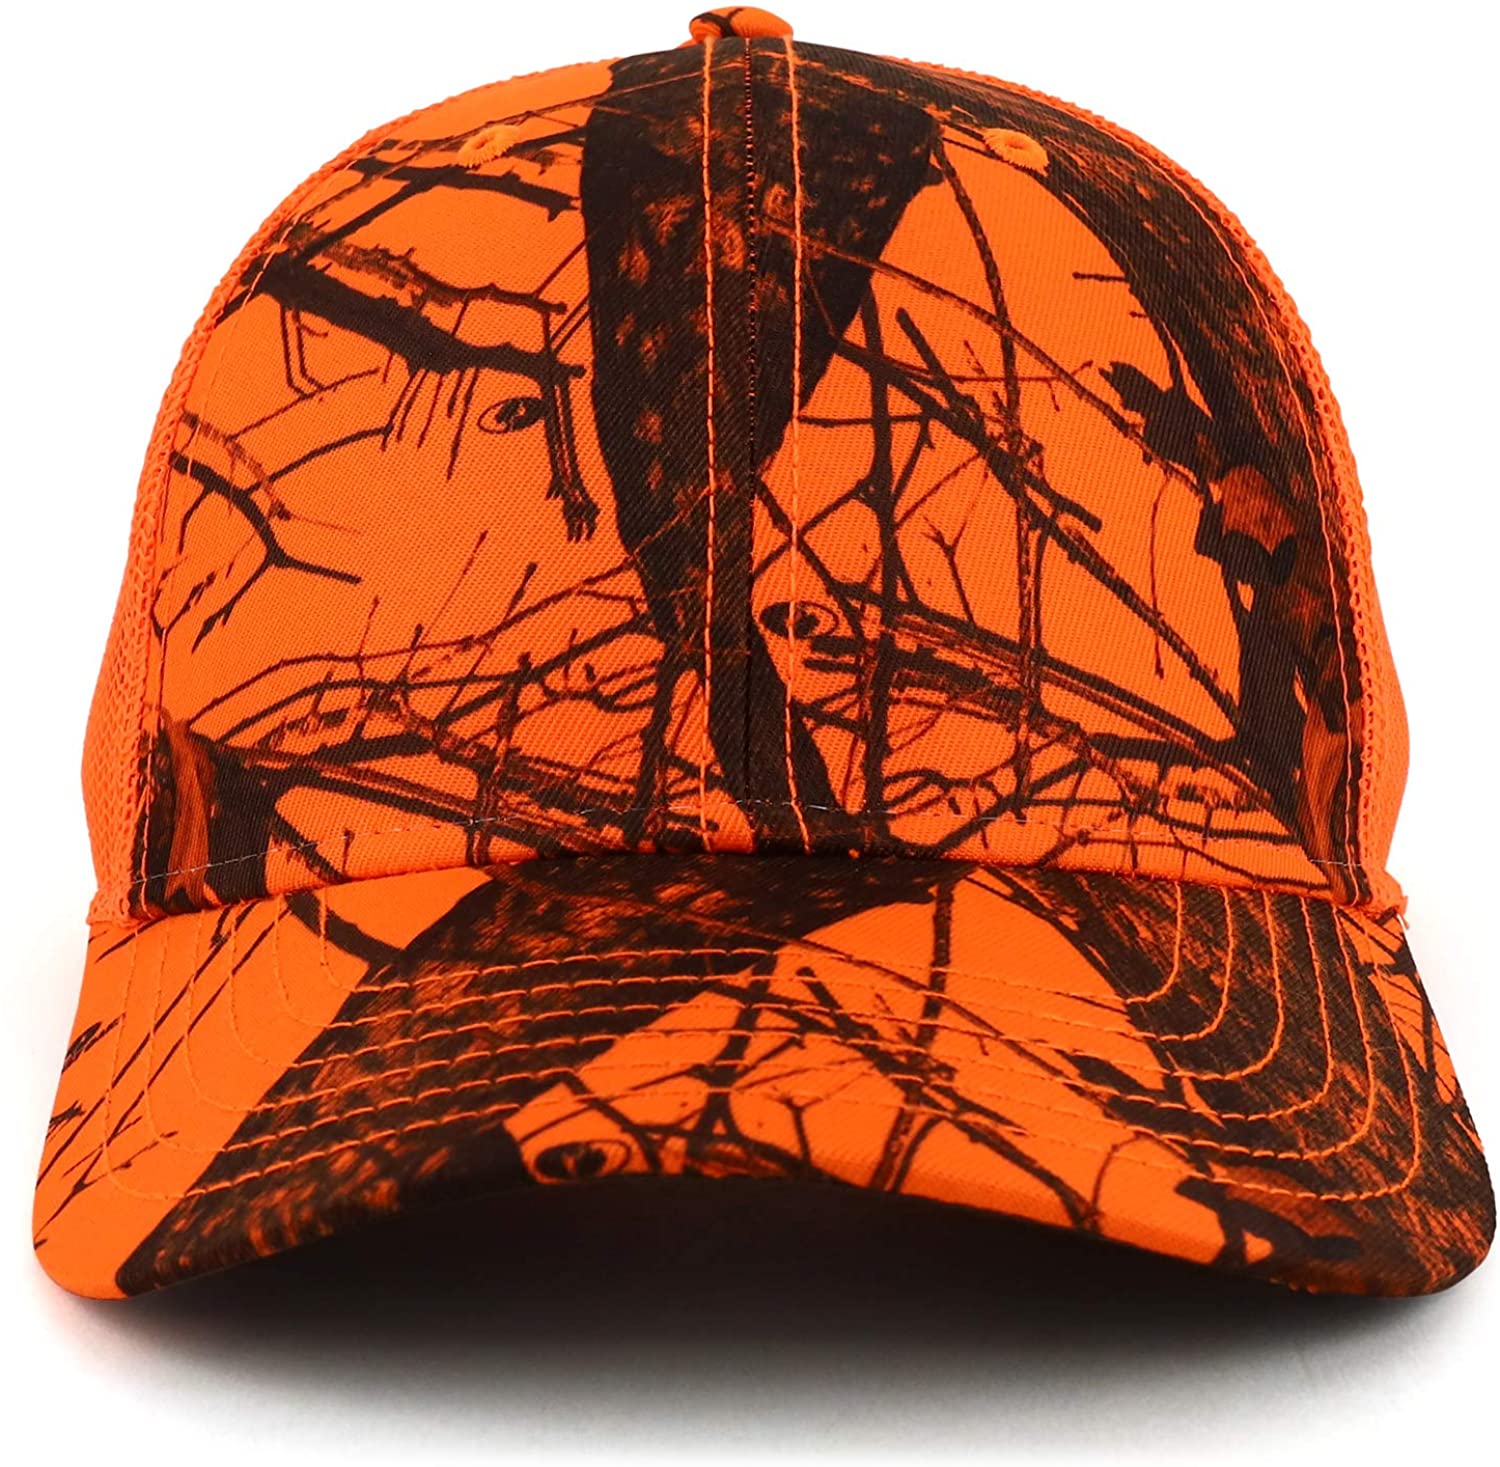 Armycrew Hunting Camouflage Outdoor Structured Trucker Mesh Cap - Blaze